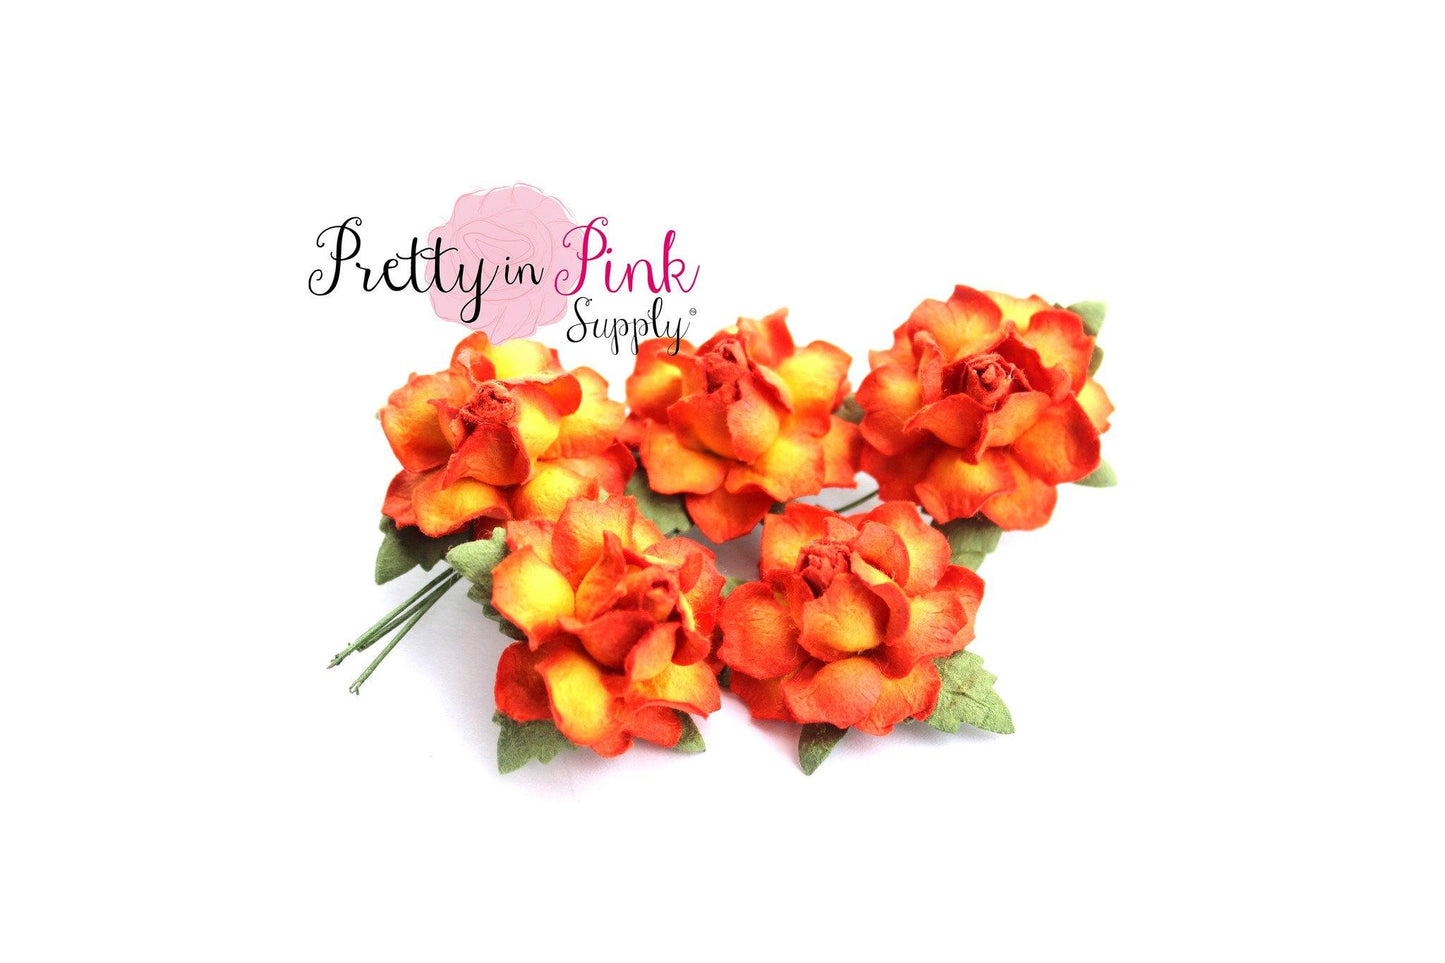 1" PREMIUM Yellow with Orange Edges Paper Flowers - Pretty in Pink Supply